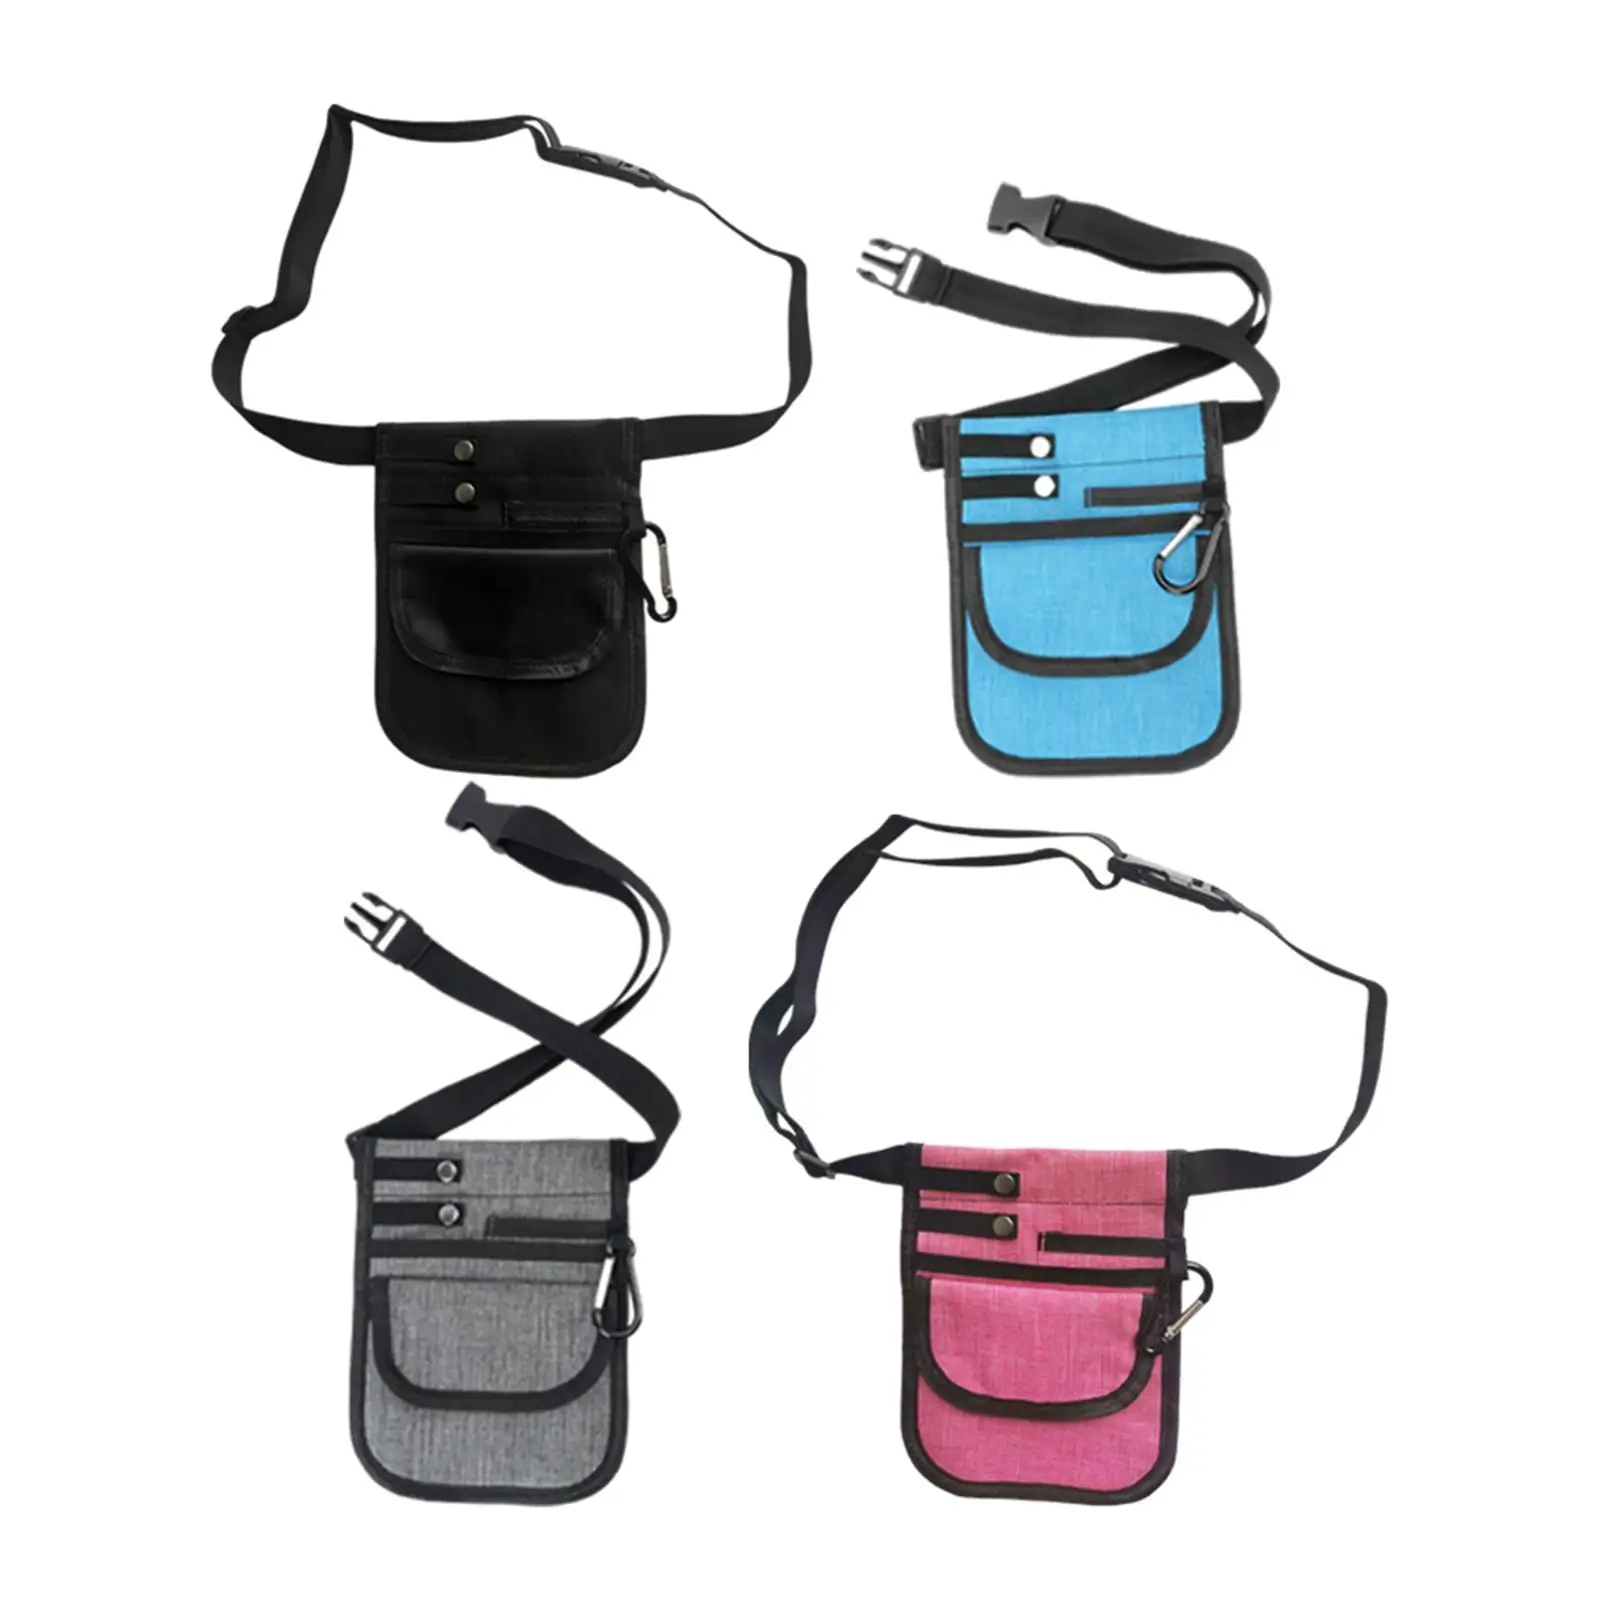  Fanny Pack Tool Organizer Pouch Utility Hip Bag for Bandage